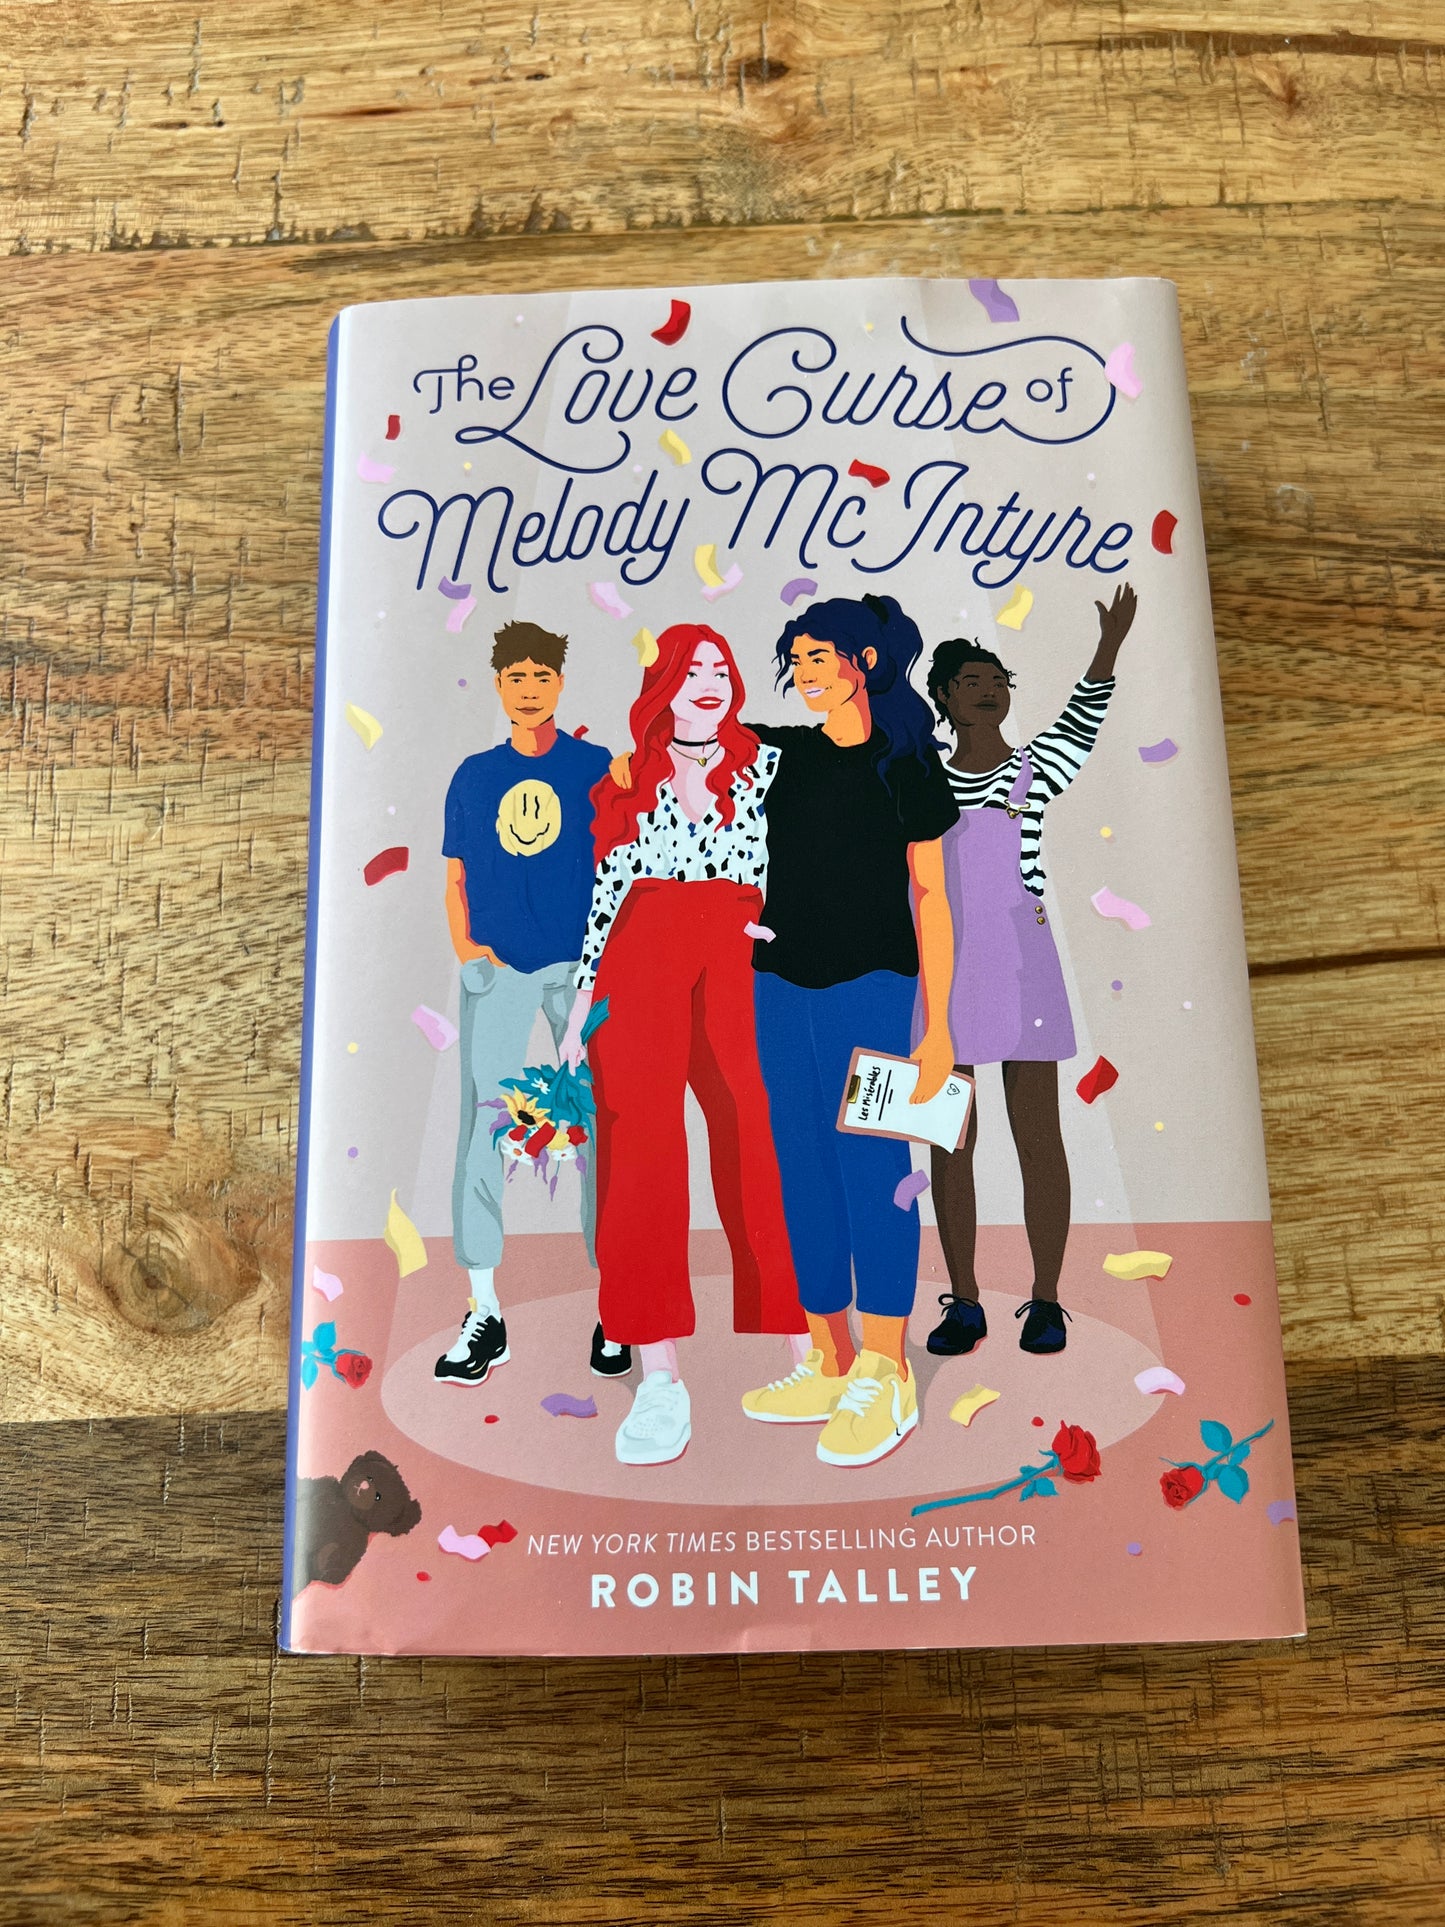 The Love Curse of Melody McIntyre